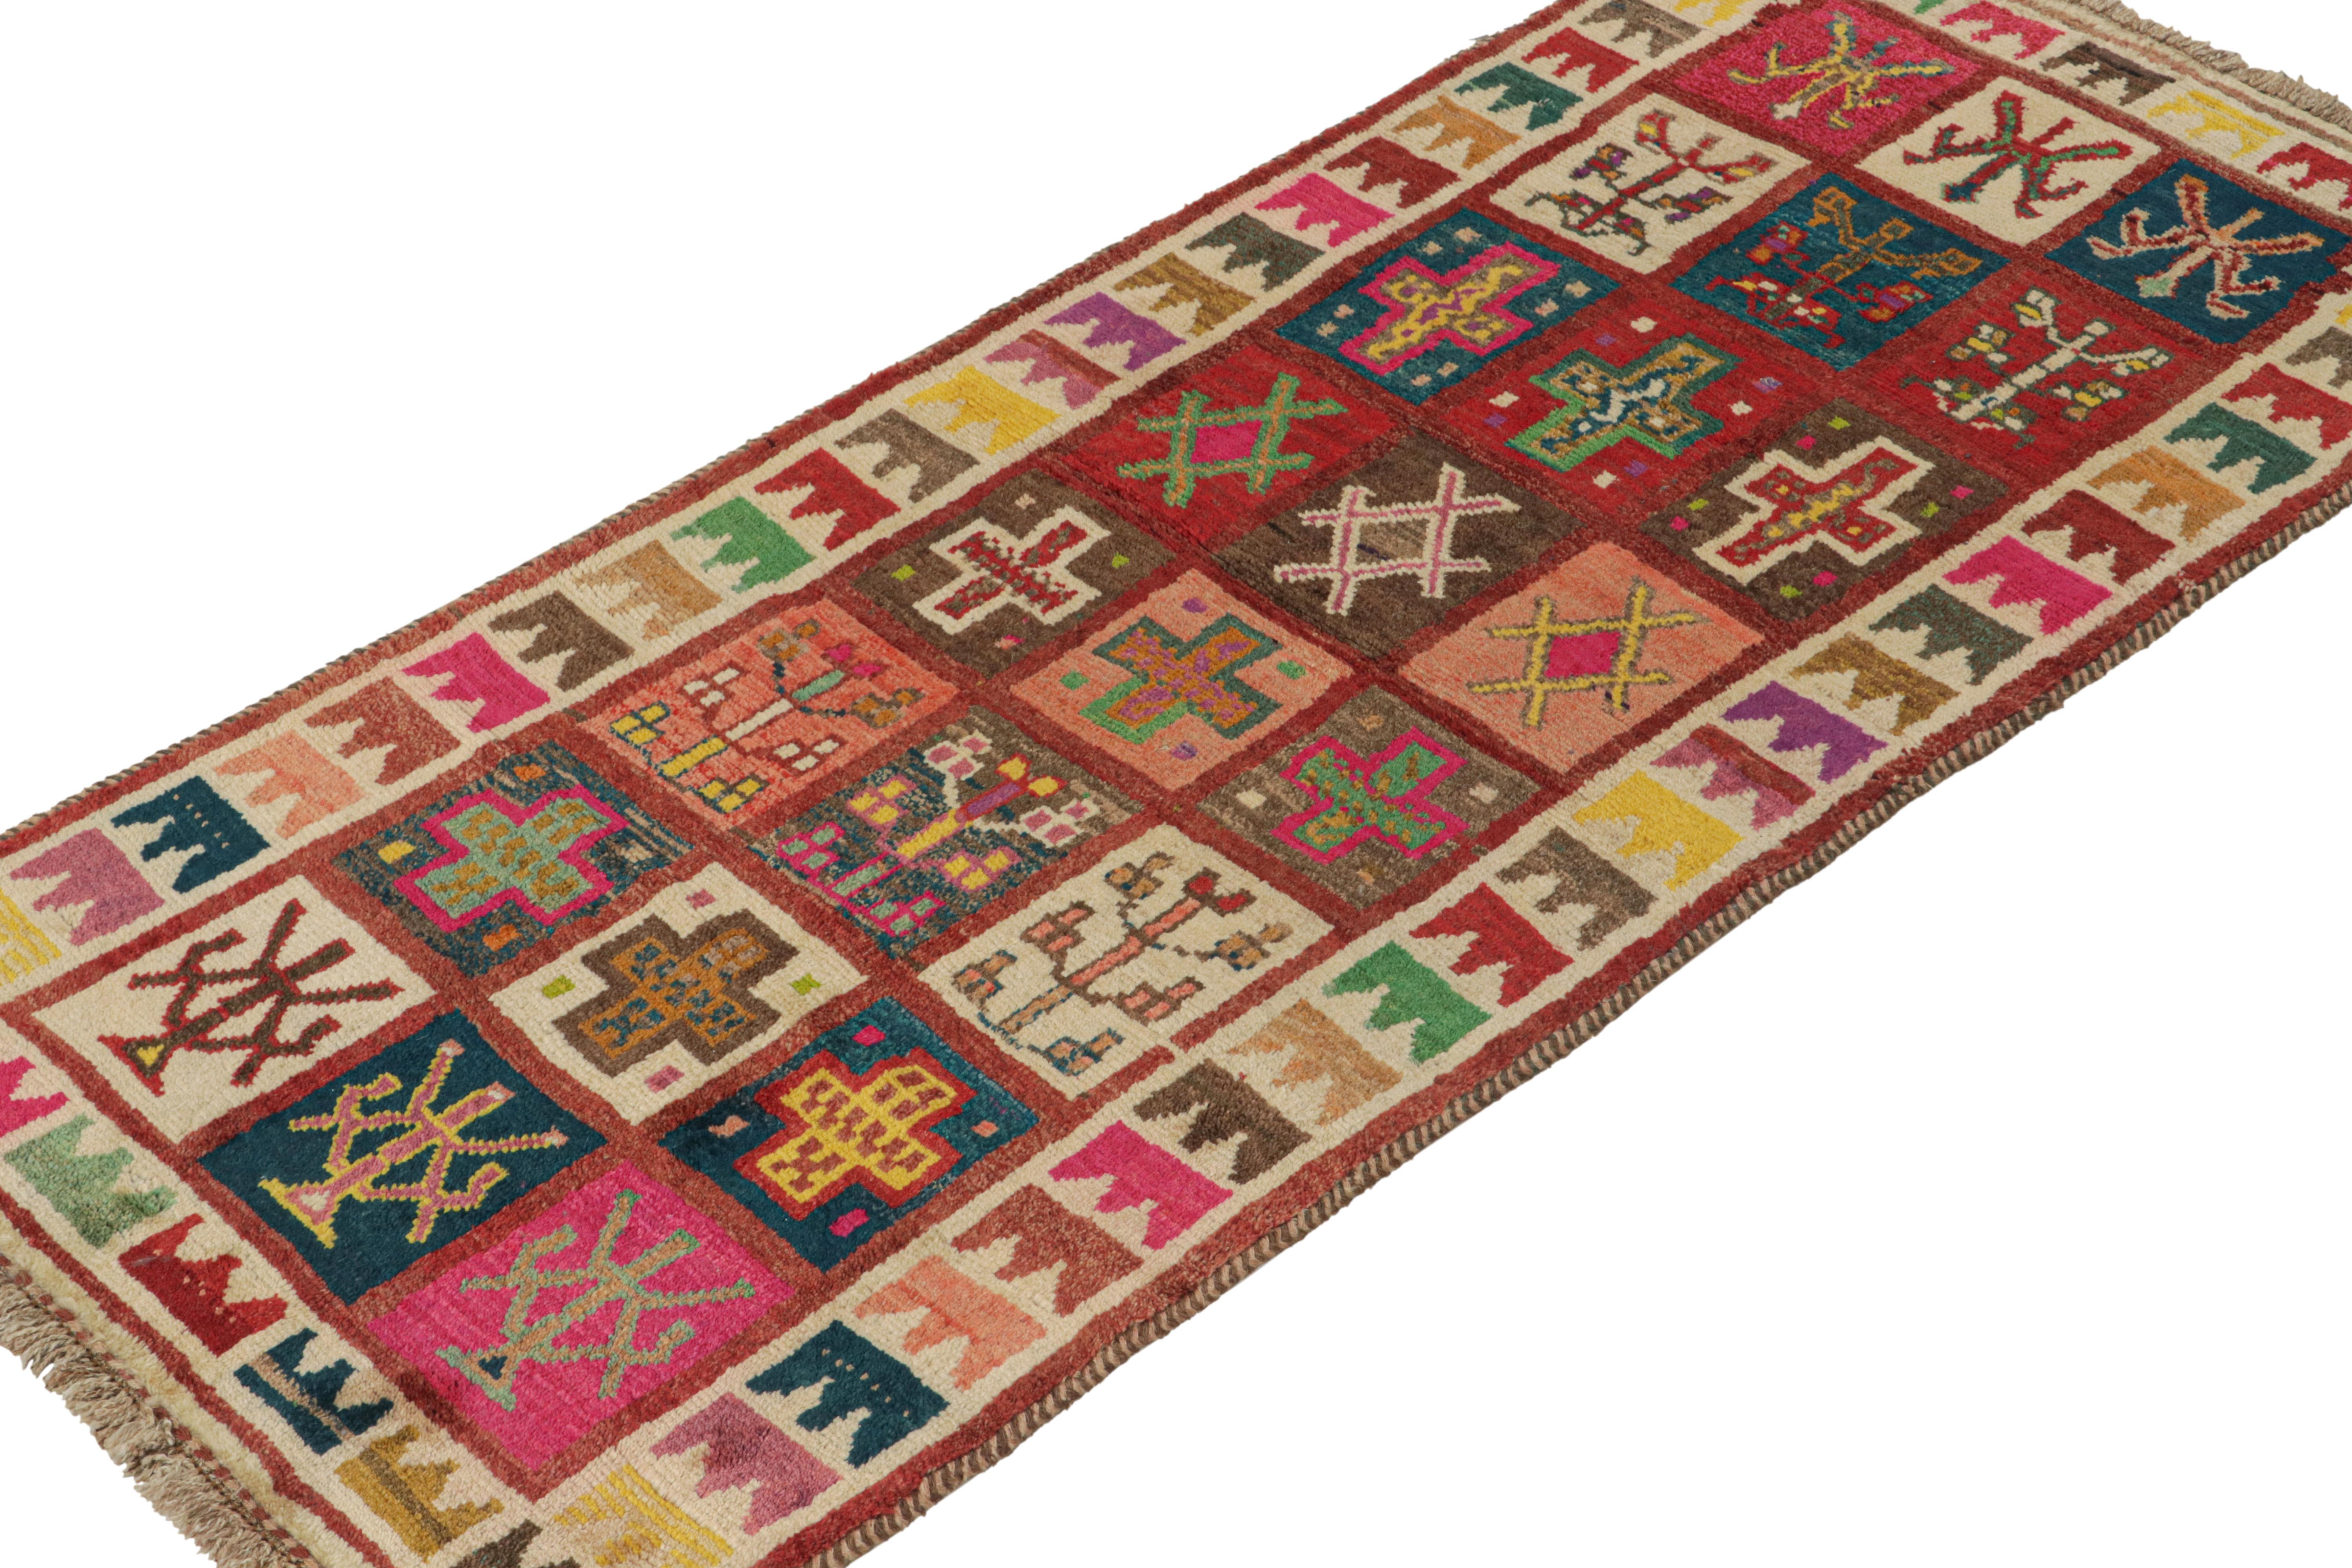 Tribal Vintage Qashqai Persian Gabbeh Runner with Geometric Patterns by Rug & Kilim For Sale